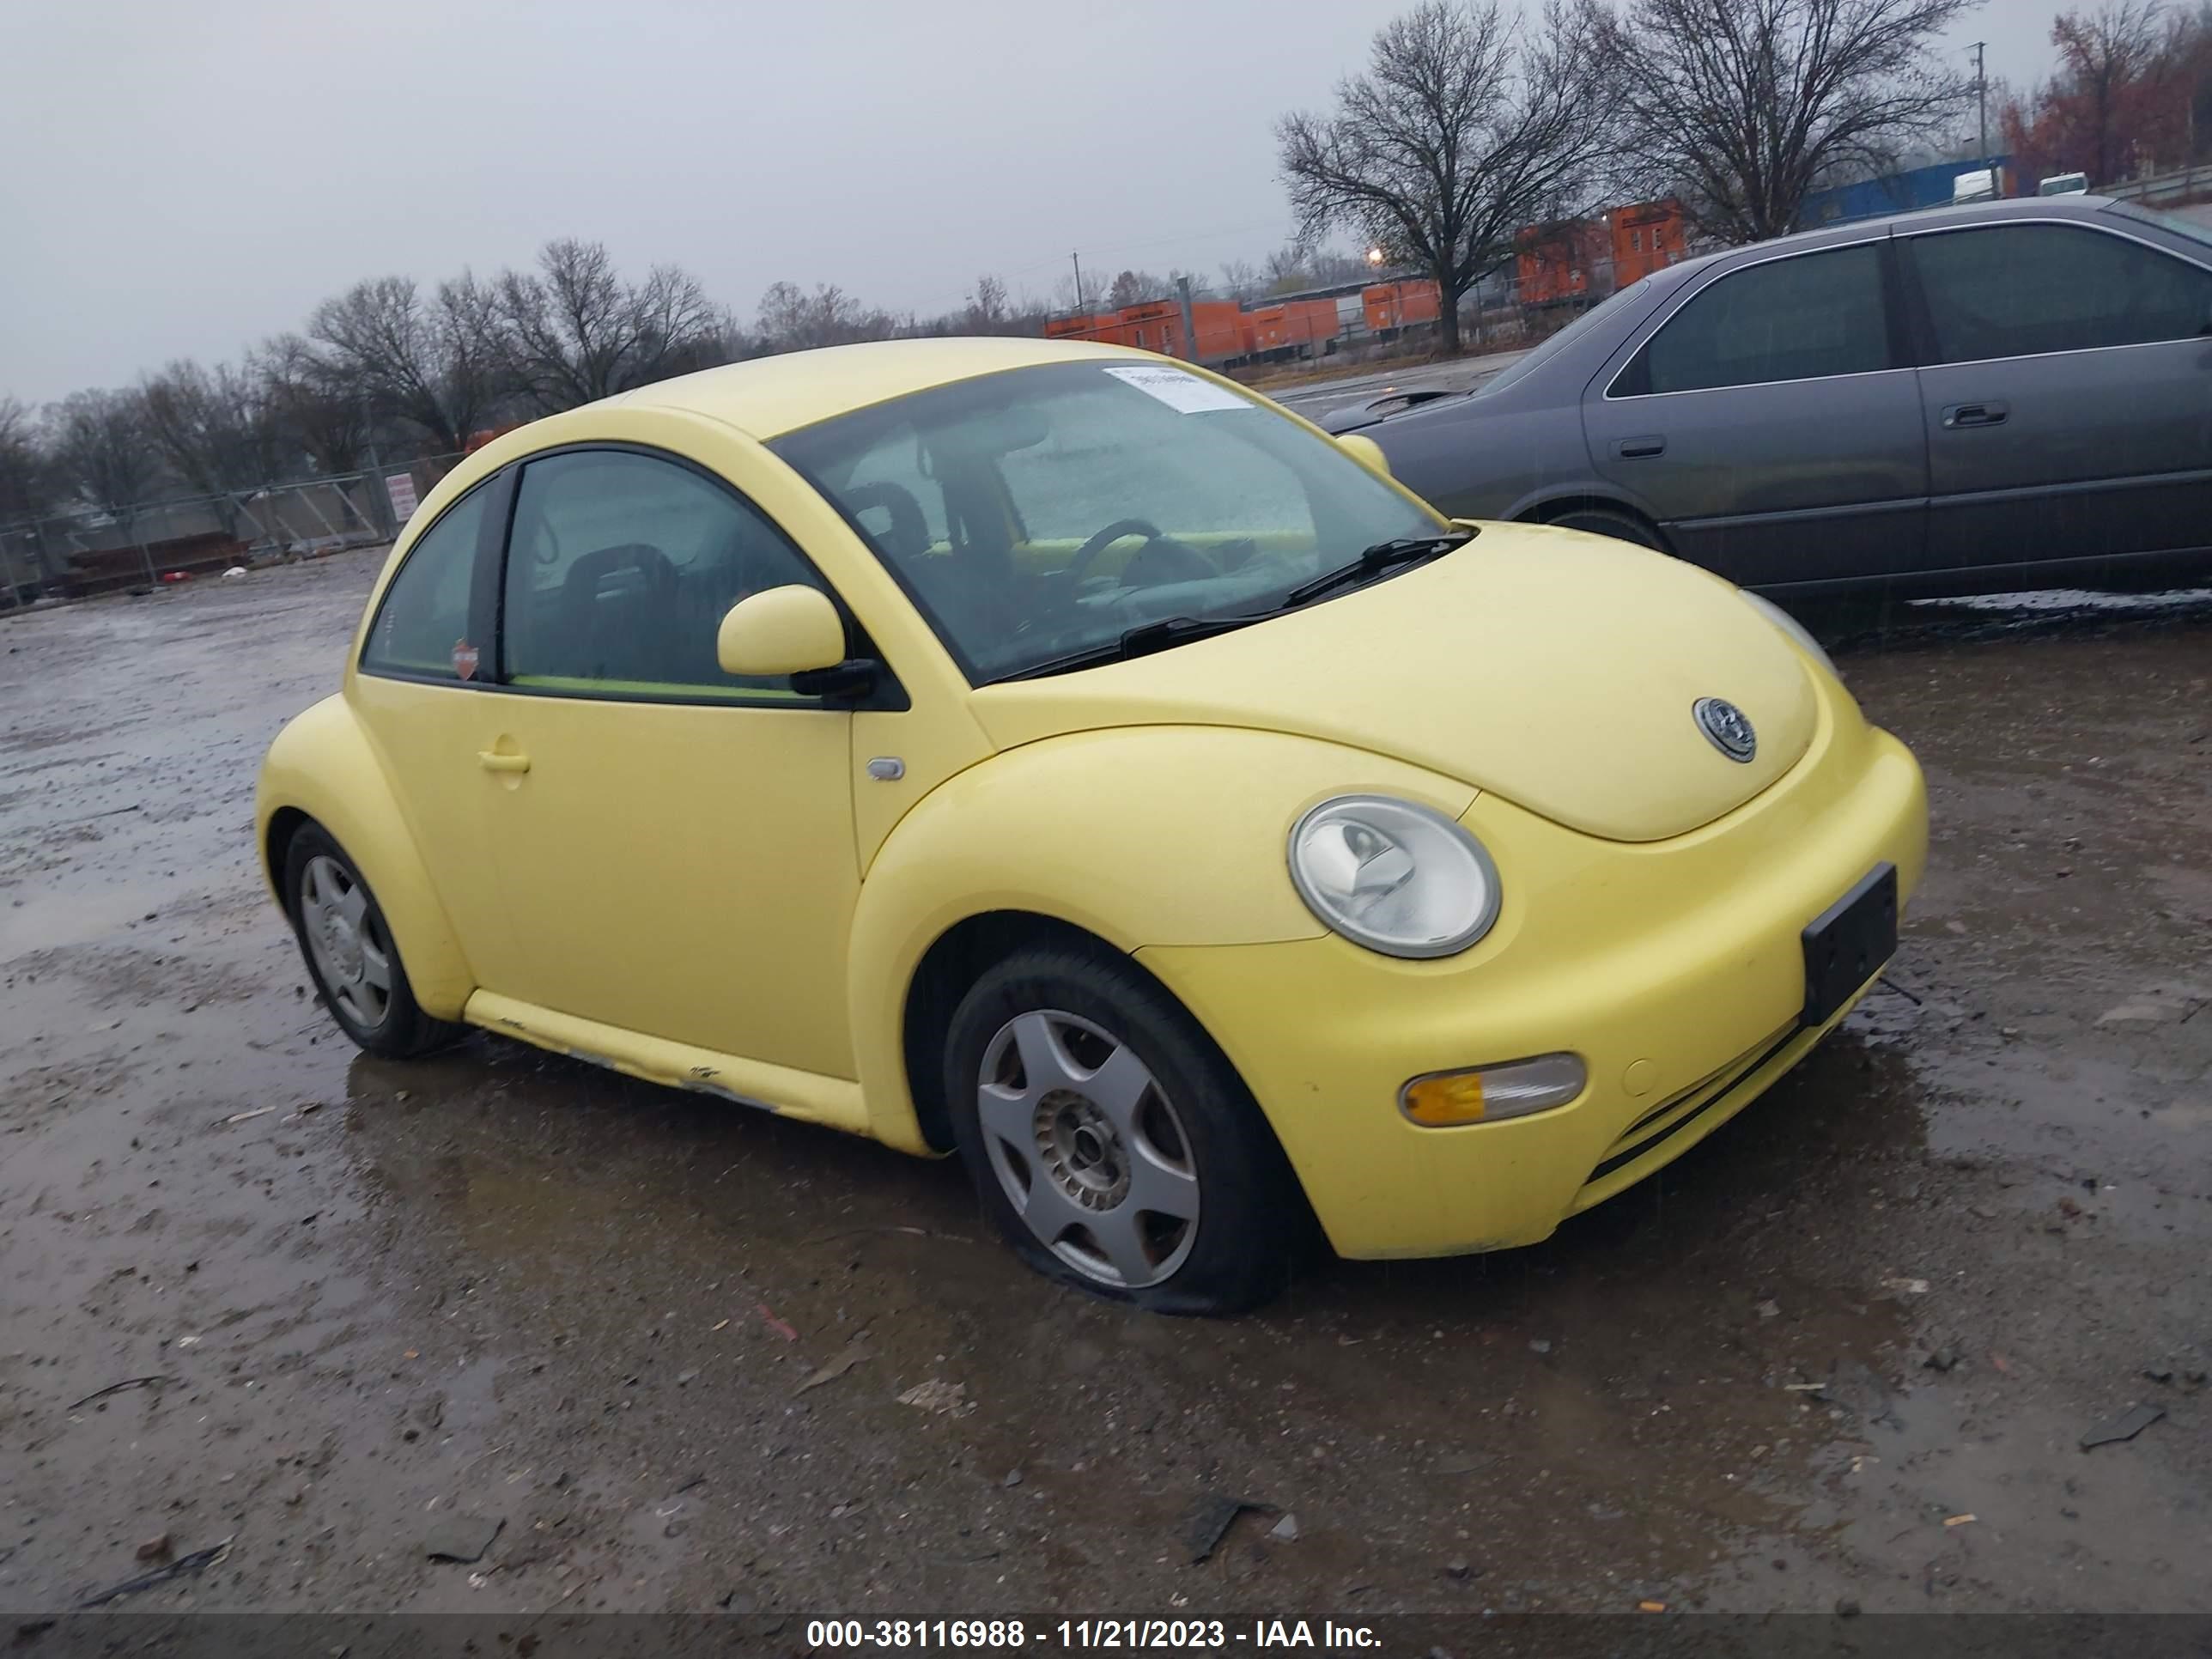 vin: 3VWBC21C1YM418142 3VWBC21C1YM418142 2000 volkswagen beetle 2000 for Sale in 37914, 3634 E. Governor John Sevier Hwy, Knoxville, Tennessee, USA